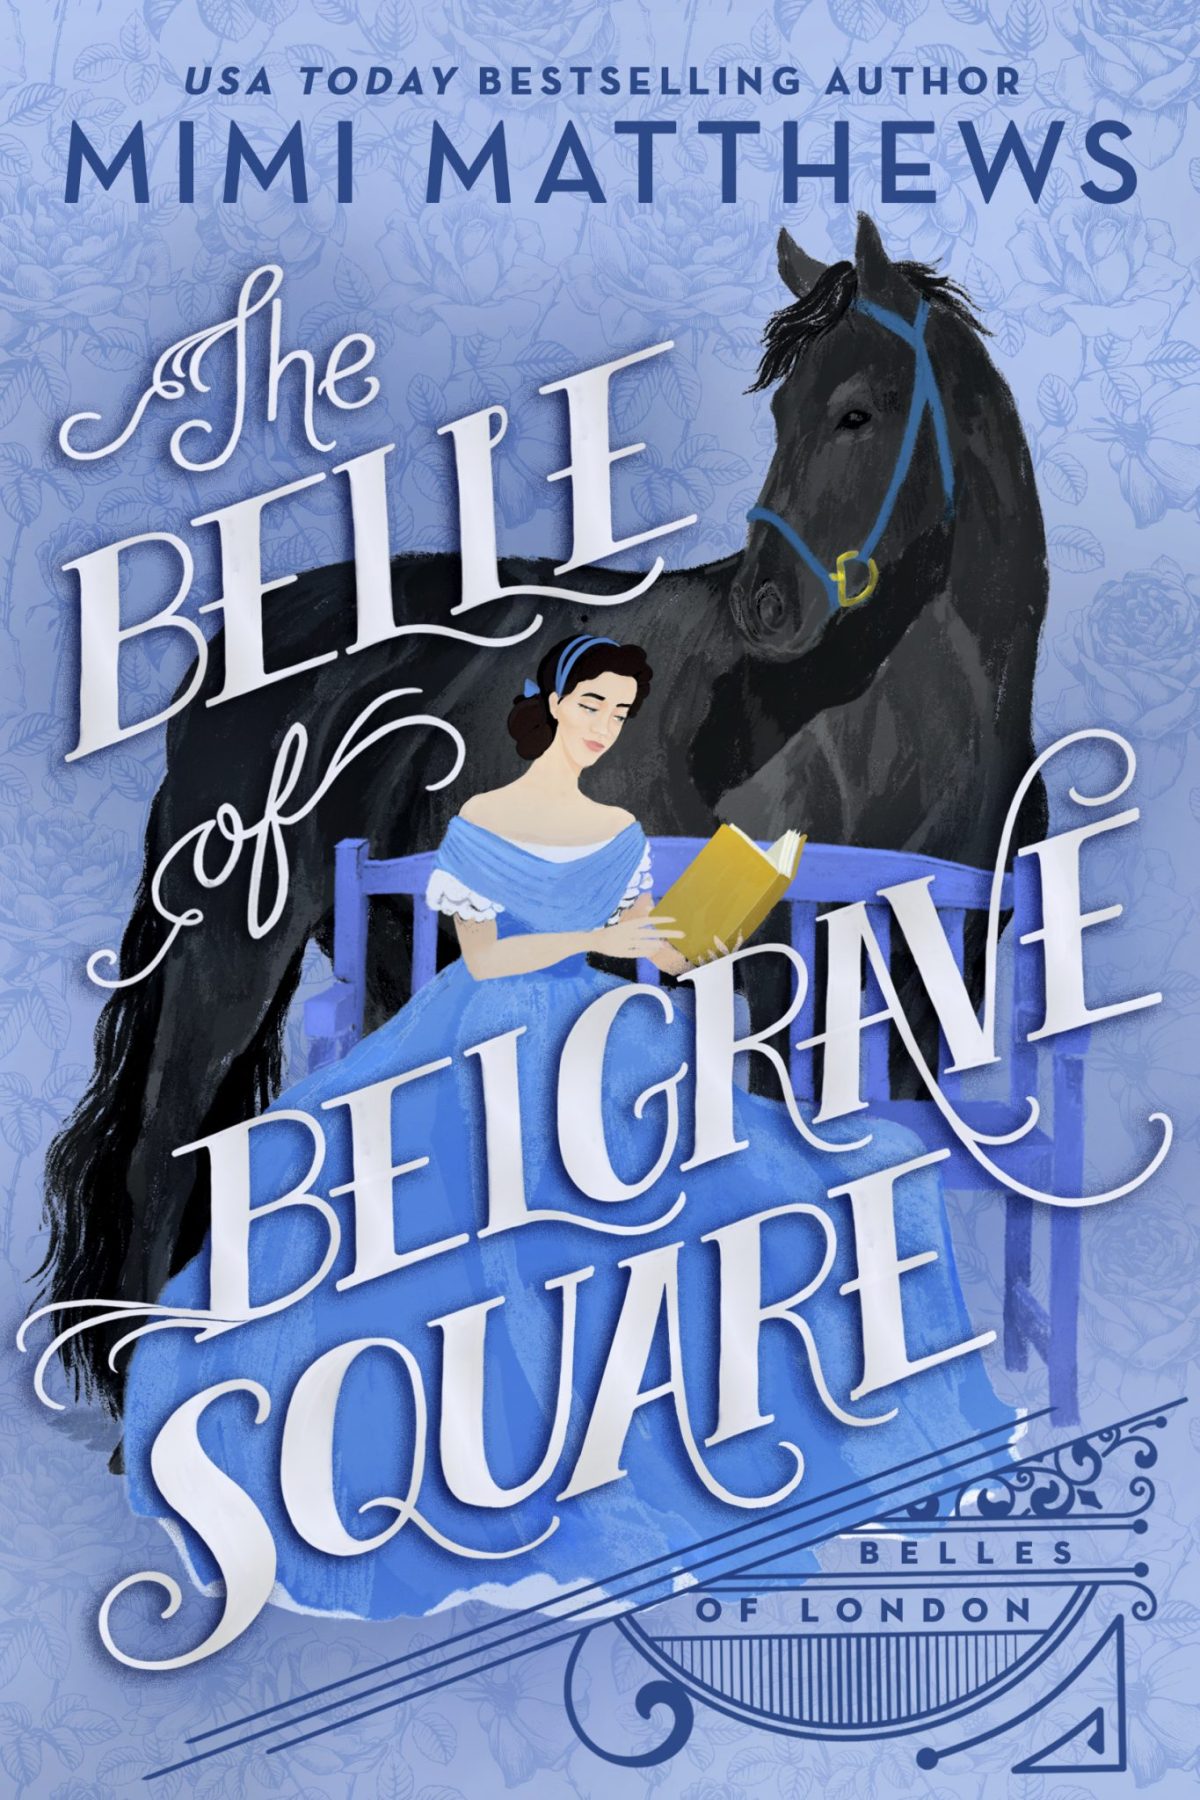 The Belle of Belgrave Square